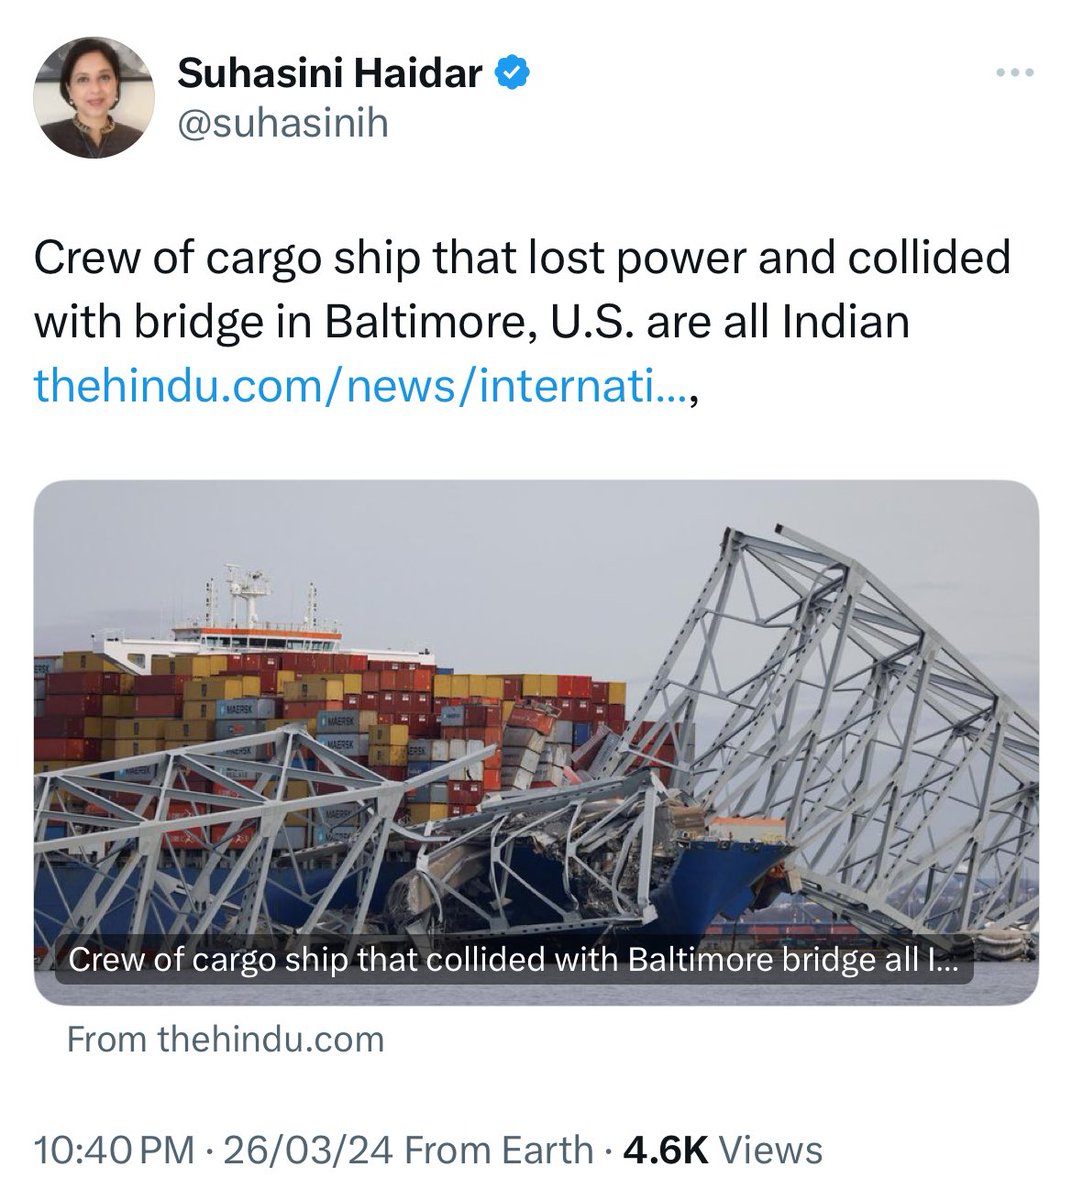 Baltimore bridge collapse: What The Hindu Journalist Suhasini Haidar didn't tell that there were 2 local US Pilots in the ship responsible for operating the ship. She also didn't post that Maryland Governor and USA President lauded Indian crew members for saving 100s of lives.